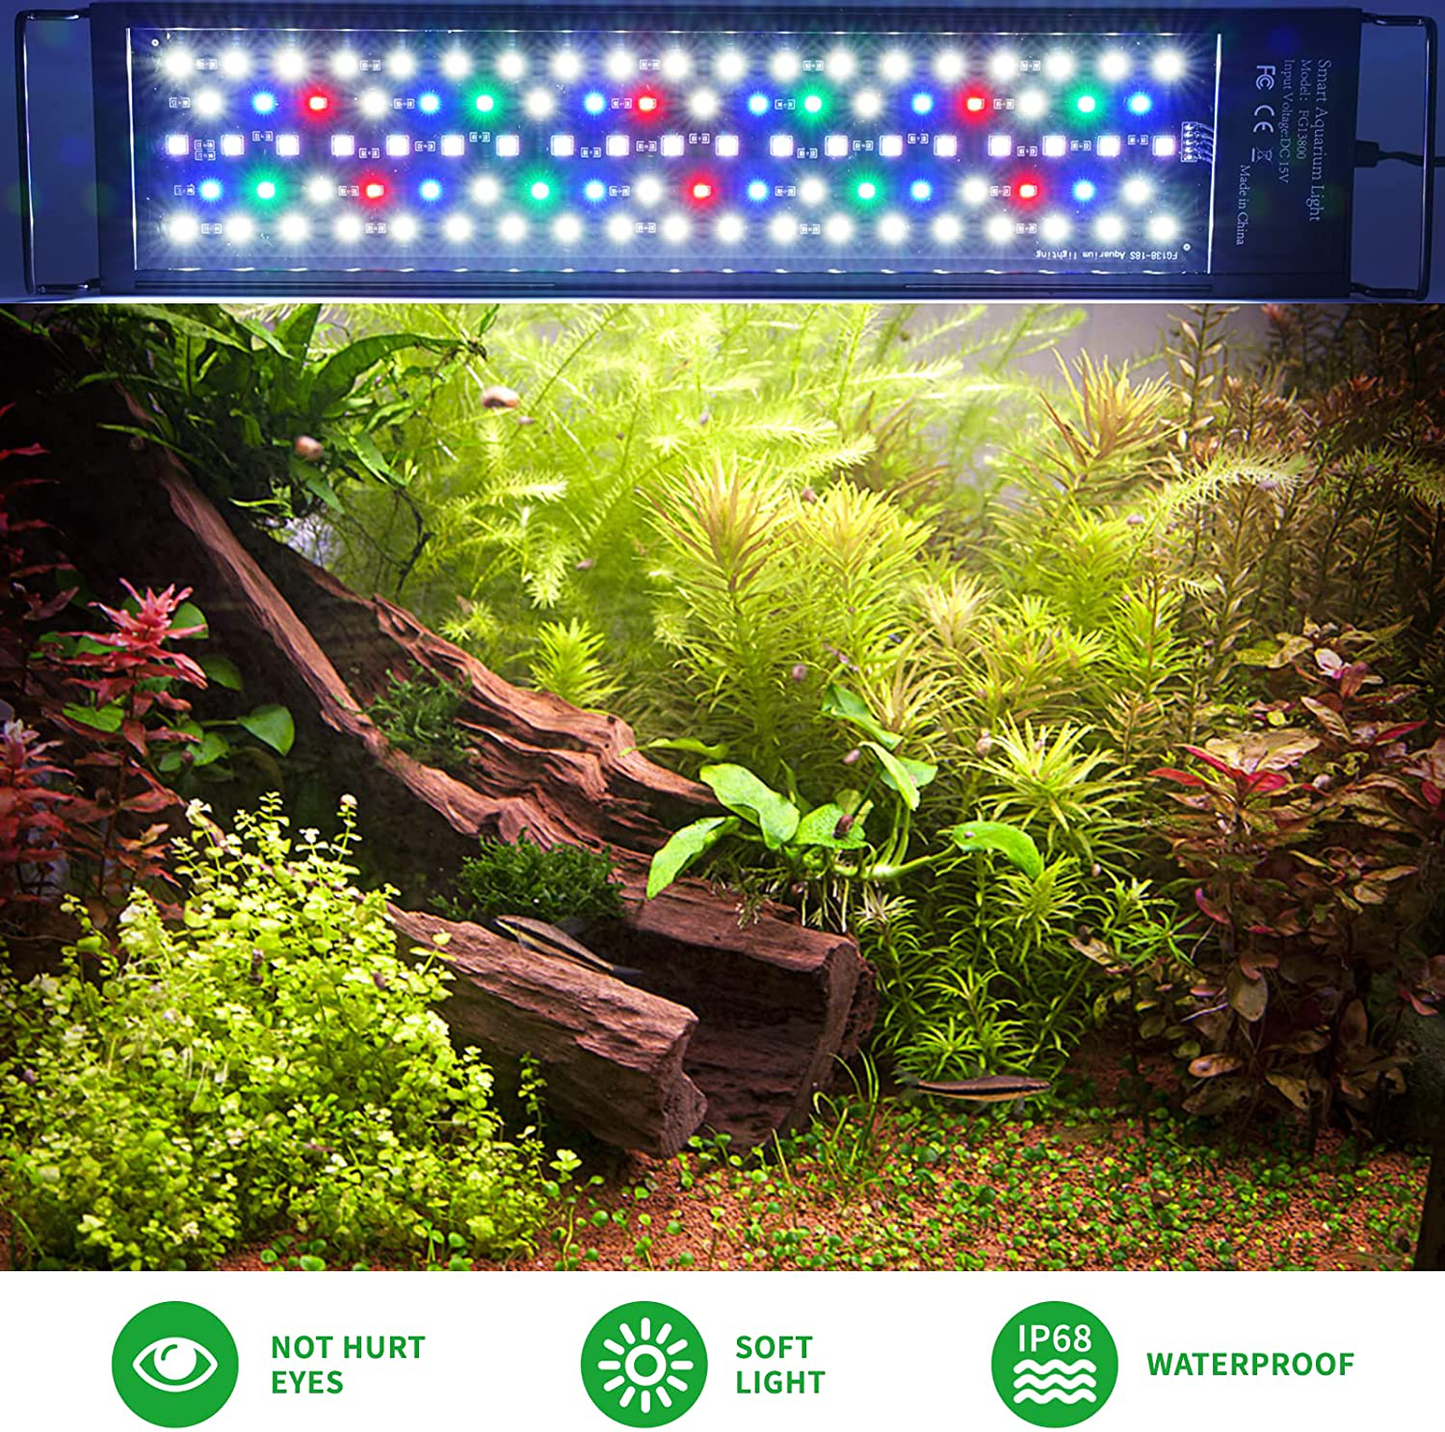 Hitauing LED Aquarium Light, Fish Tank Light Programmable Auto on & off /Timer, 56W Led Light for 36-42 Inch Planted Aquarium Light, Full Spectrum Dimmable 7 Colors 10 Intensity &LCD Controller